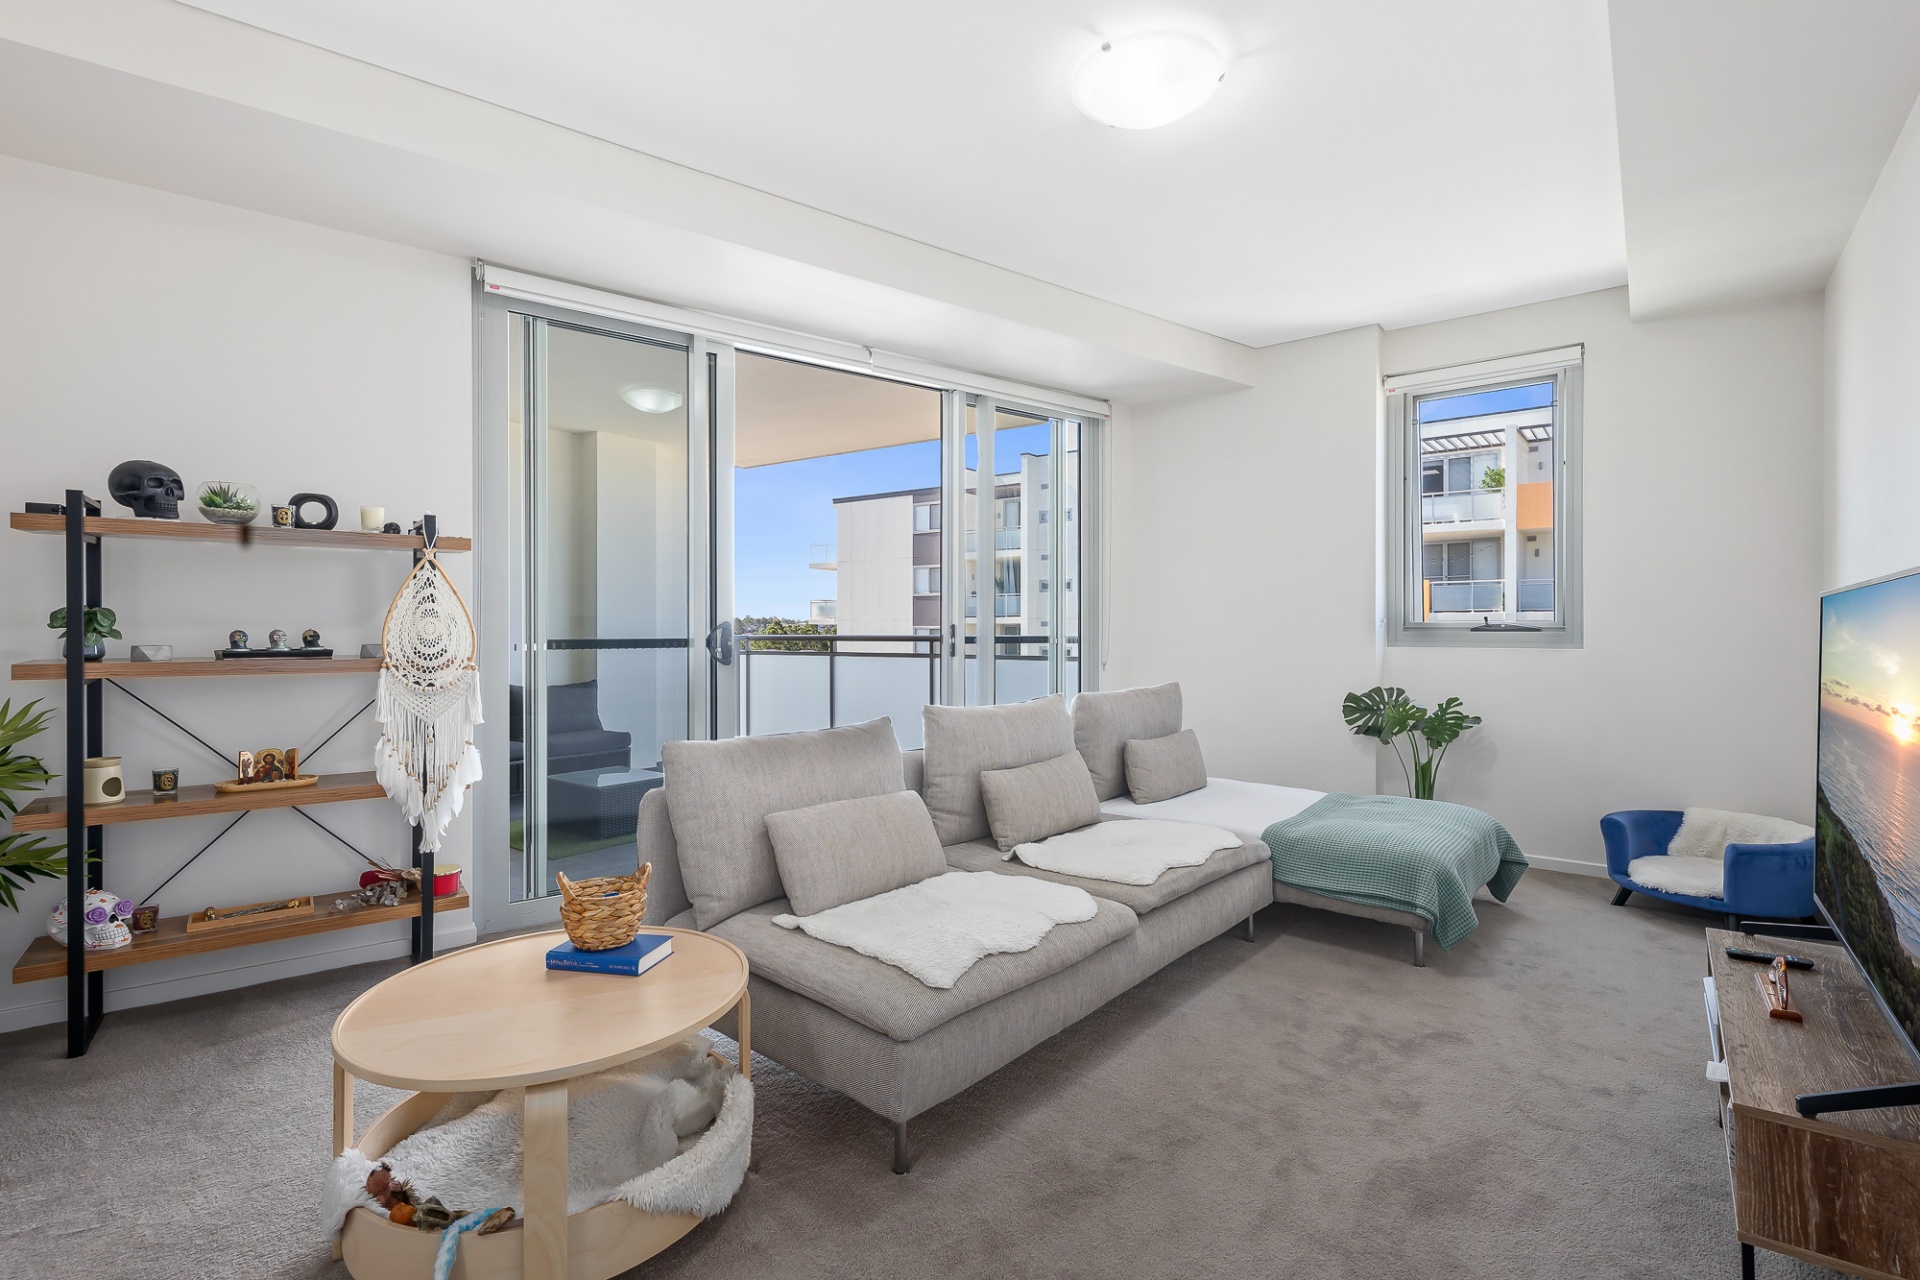 2 Bedrooms, Apartment, Sold , Rebecca Street, 2 Bathrooms, Listing ID 1616, Tallawong, NSW, Australia, 2762,